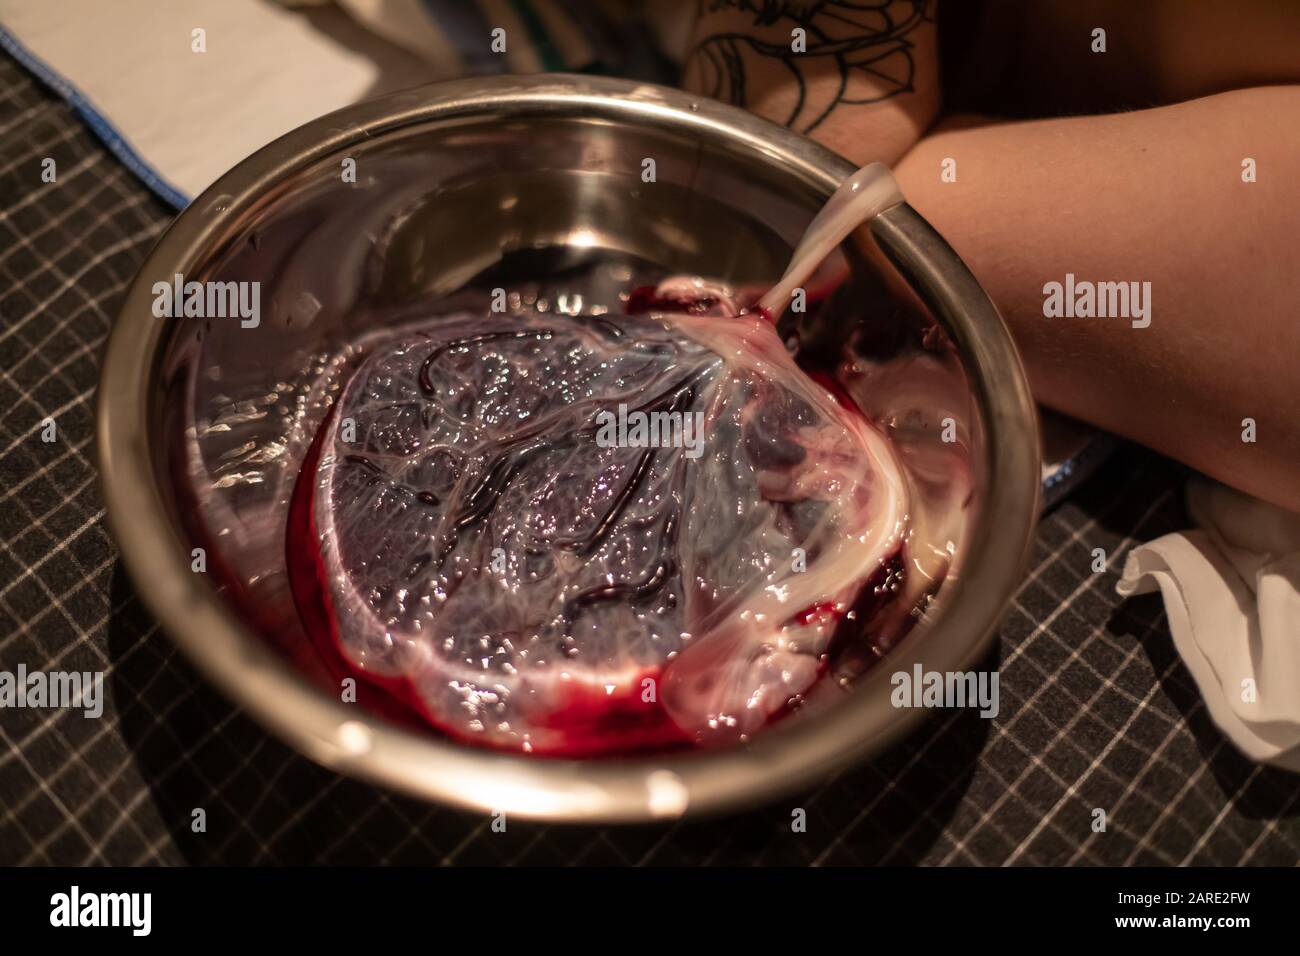 A close up detailed view of a bloody human placenta, maternal side, with intact umbilical cord in a sterile dish shortly after childbirth, copy space to sides Stock Photo